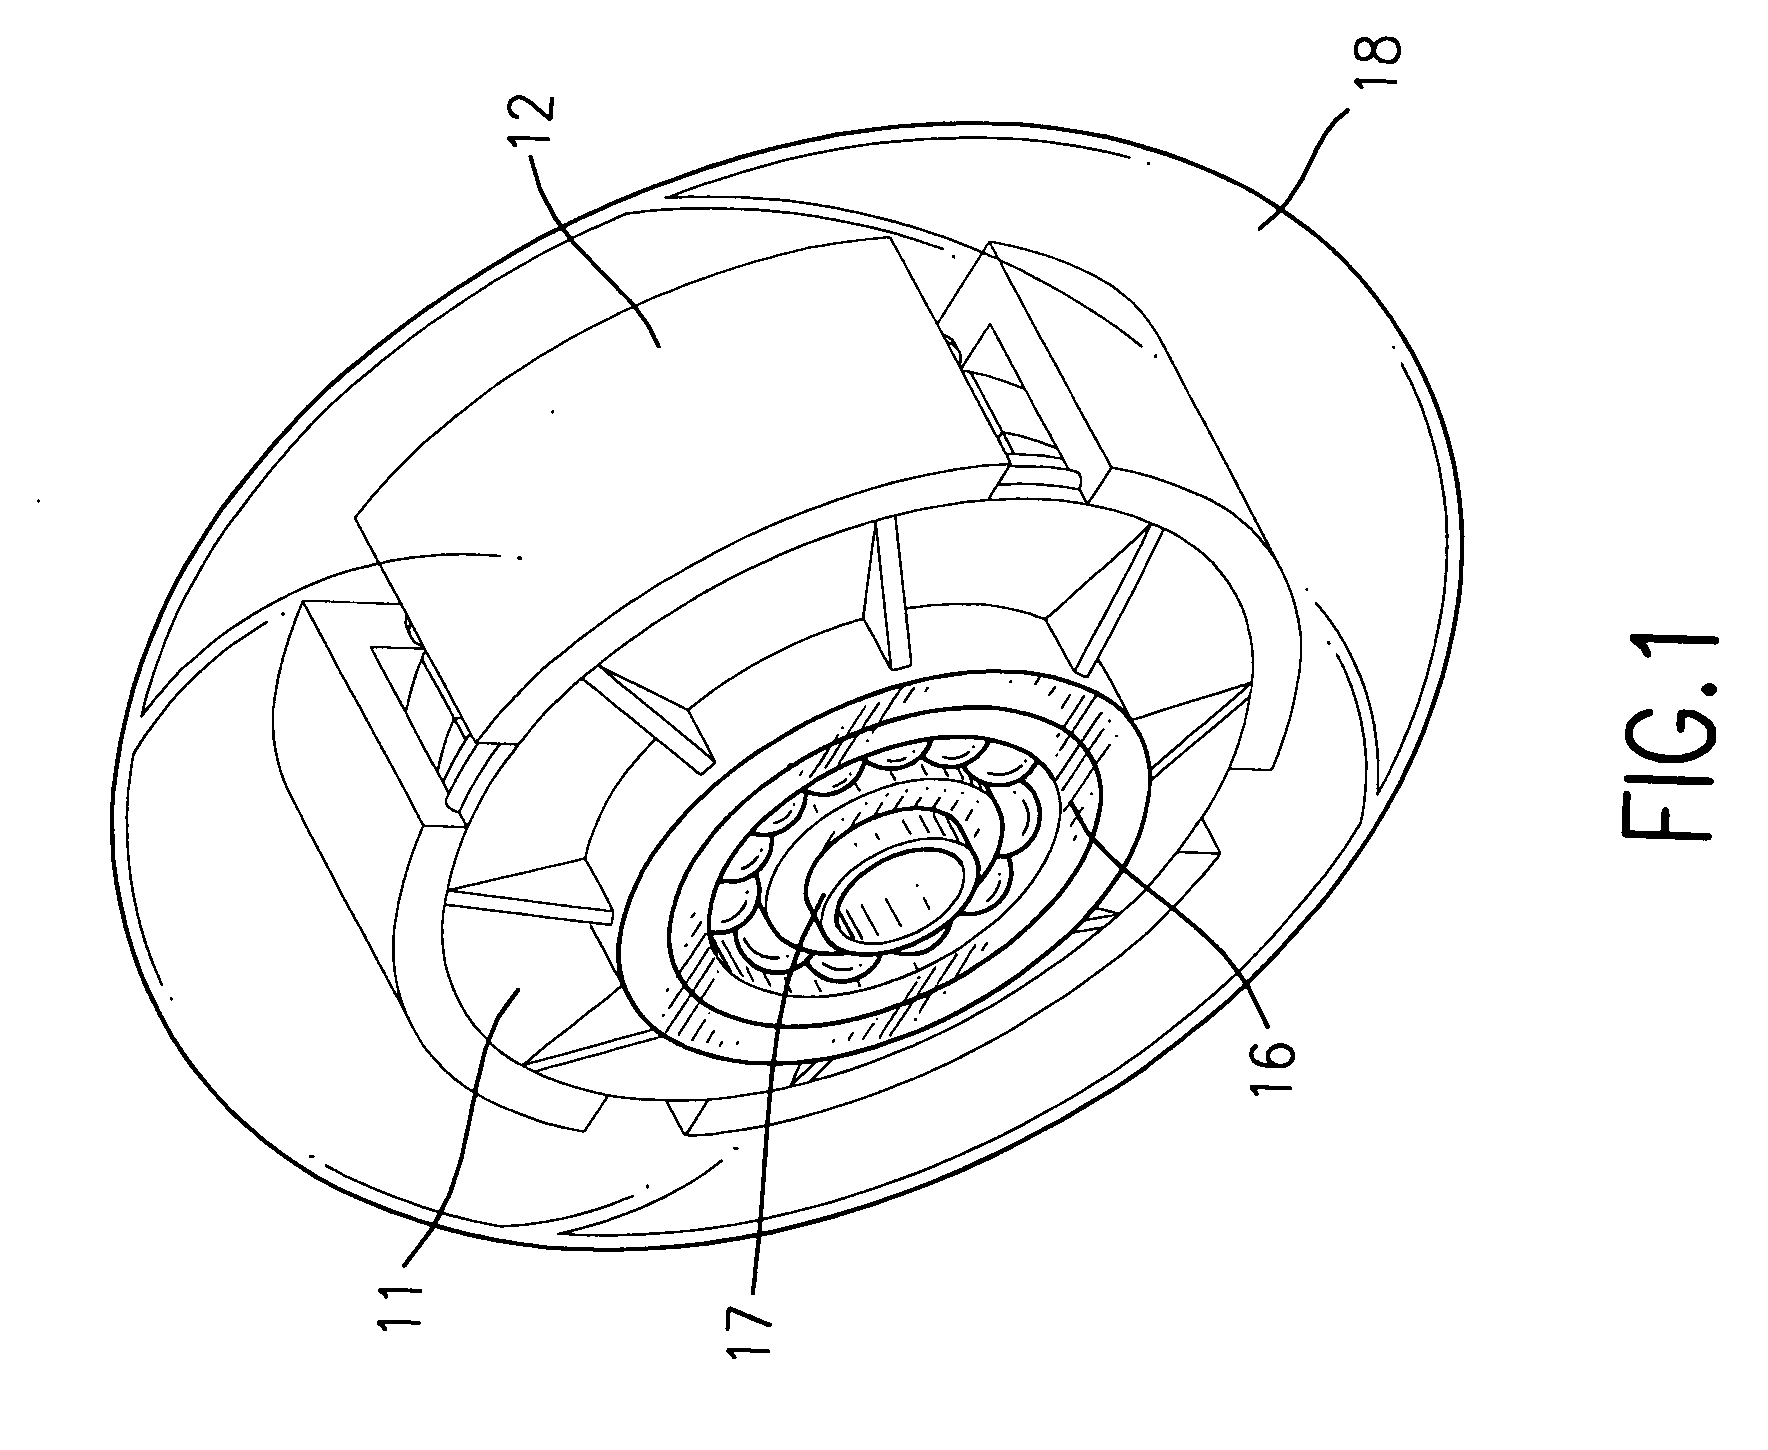 Skate wheels incorporating transverse-mounted and self-powered illuminating devices